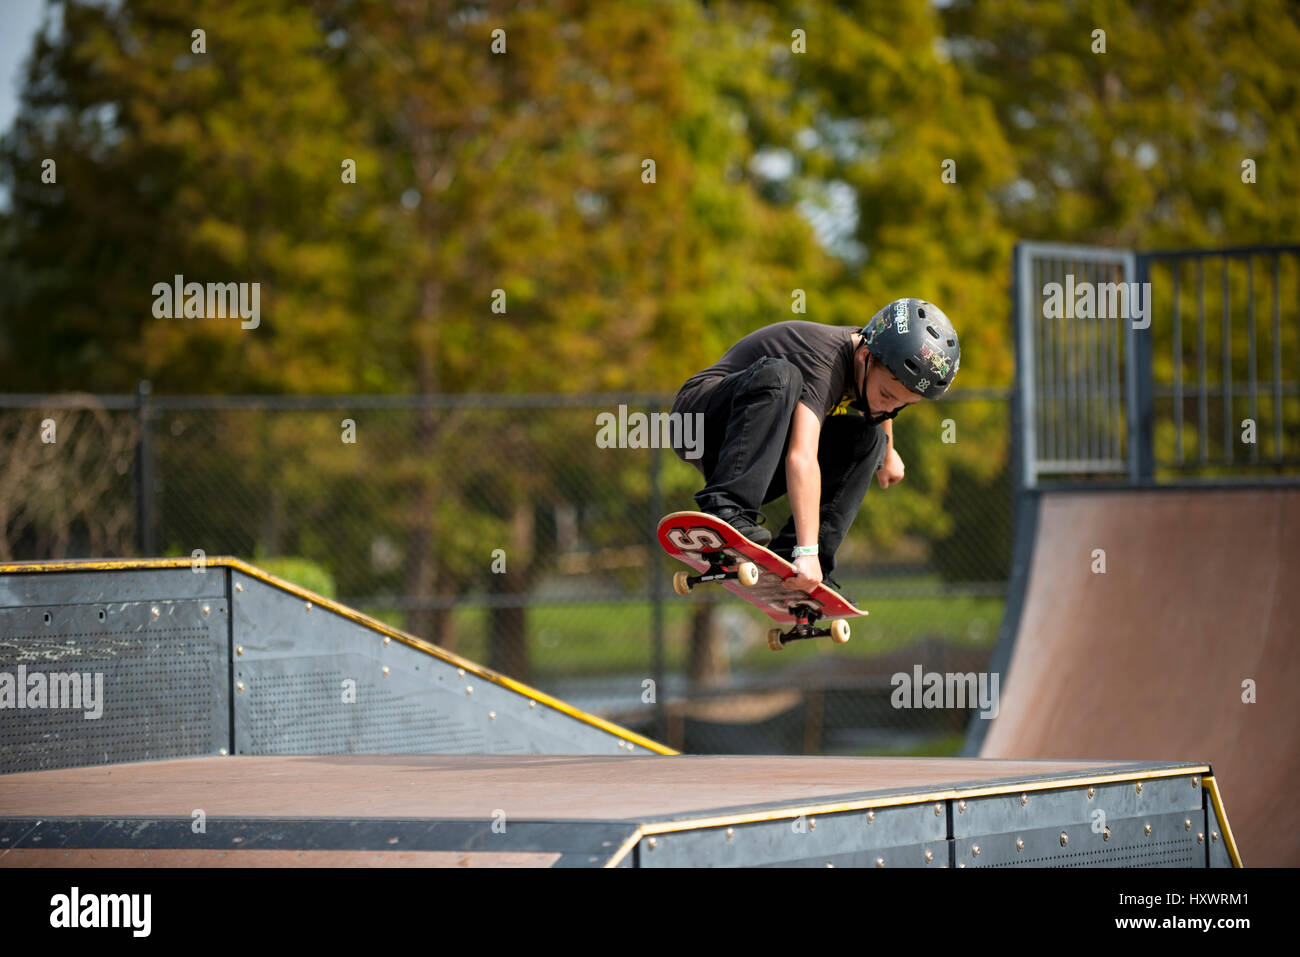 young boy skate boarding jumping high holding board Stock Photo